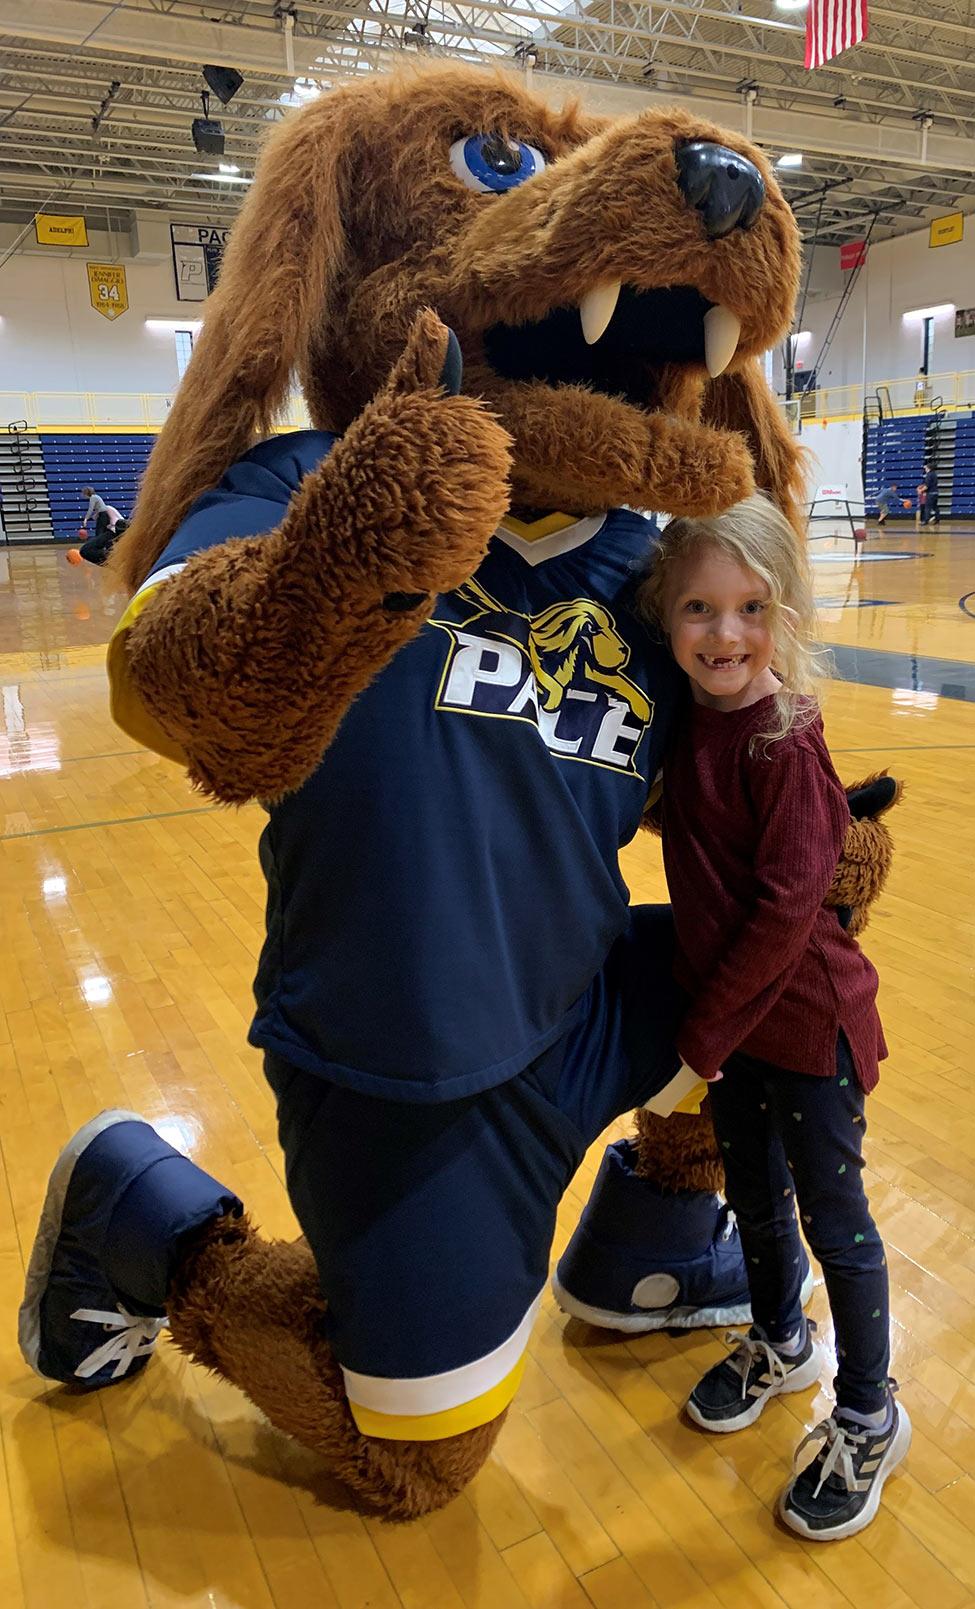 Pace University mascot, T-Bone, posing with a young child